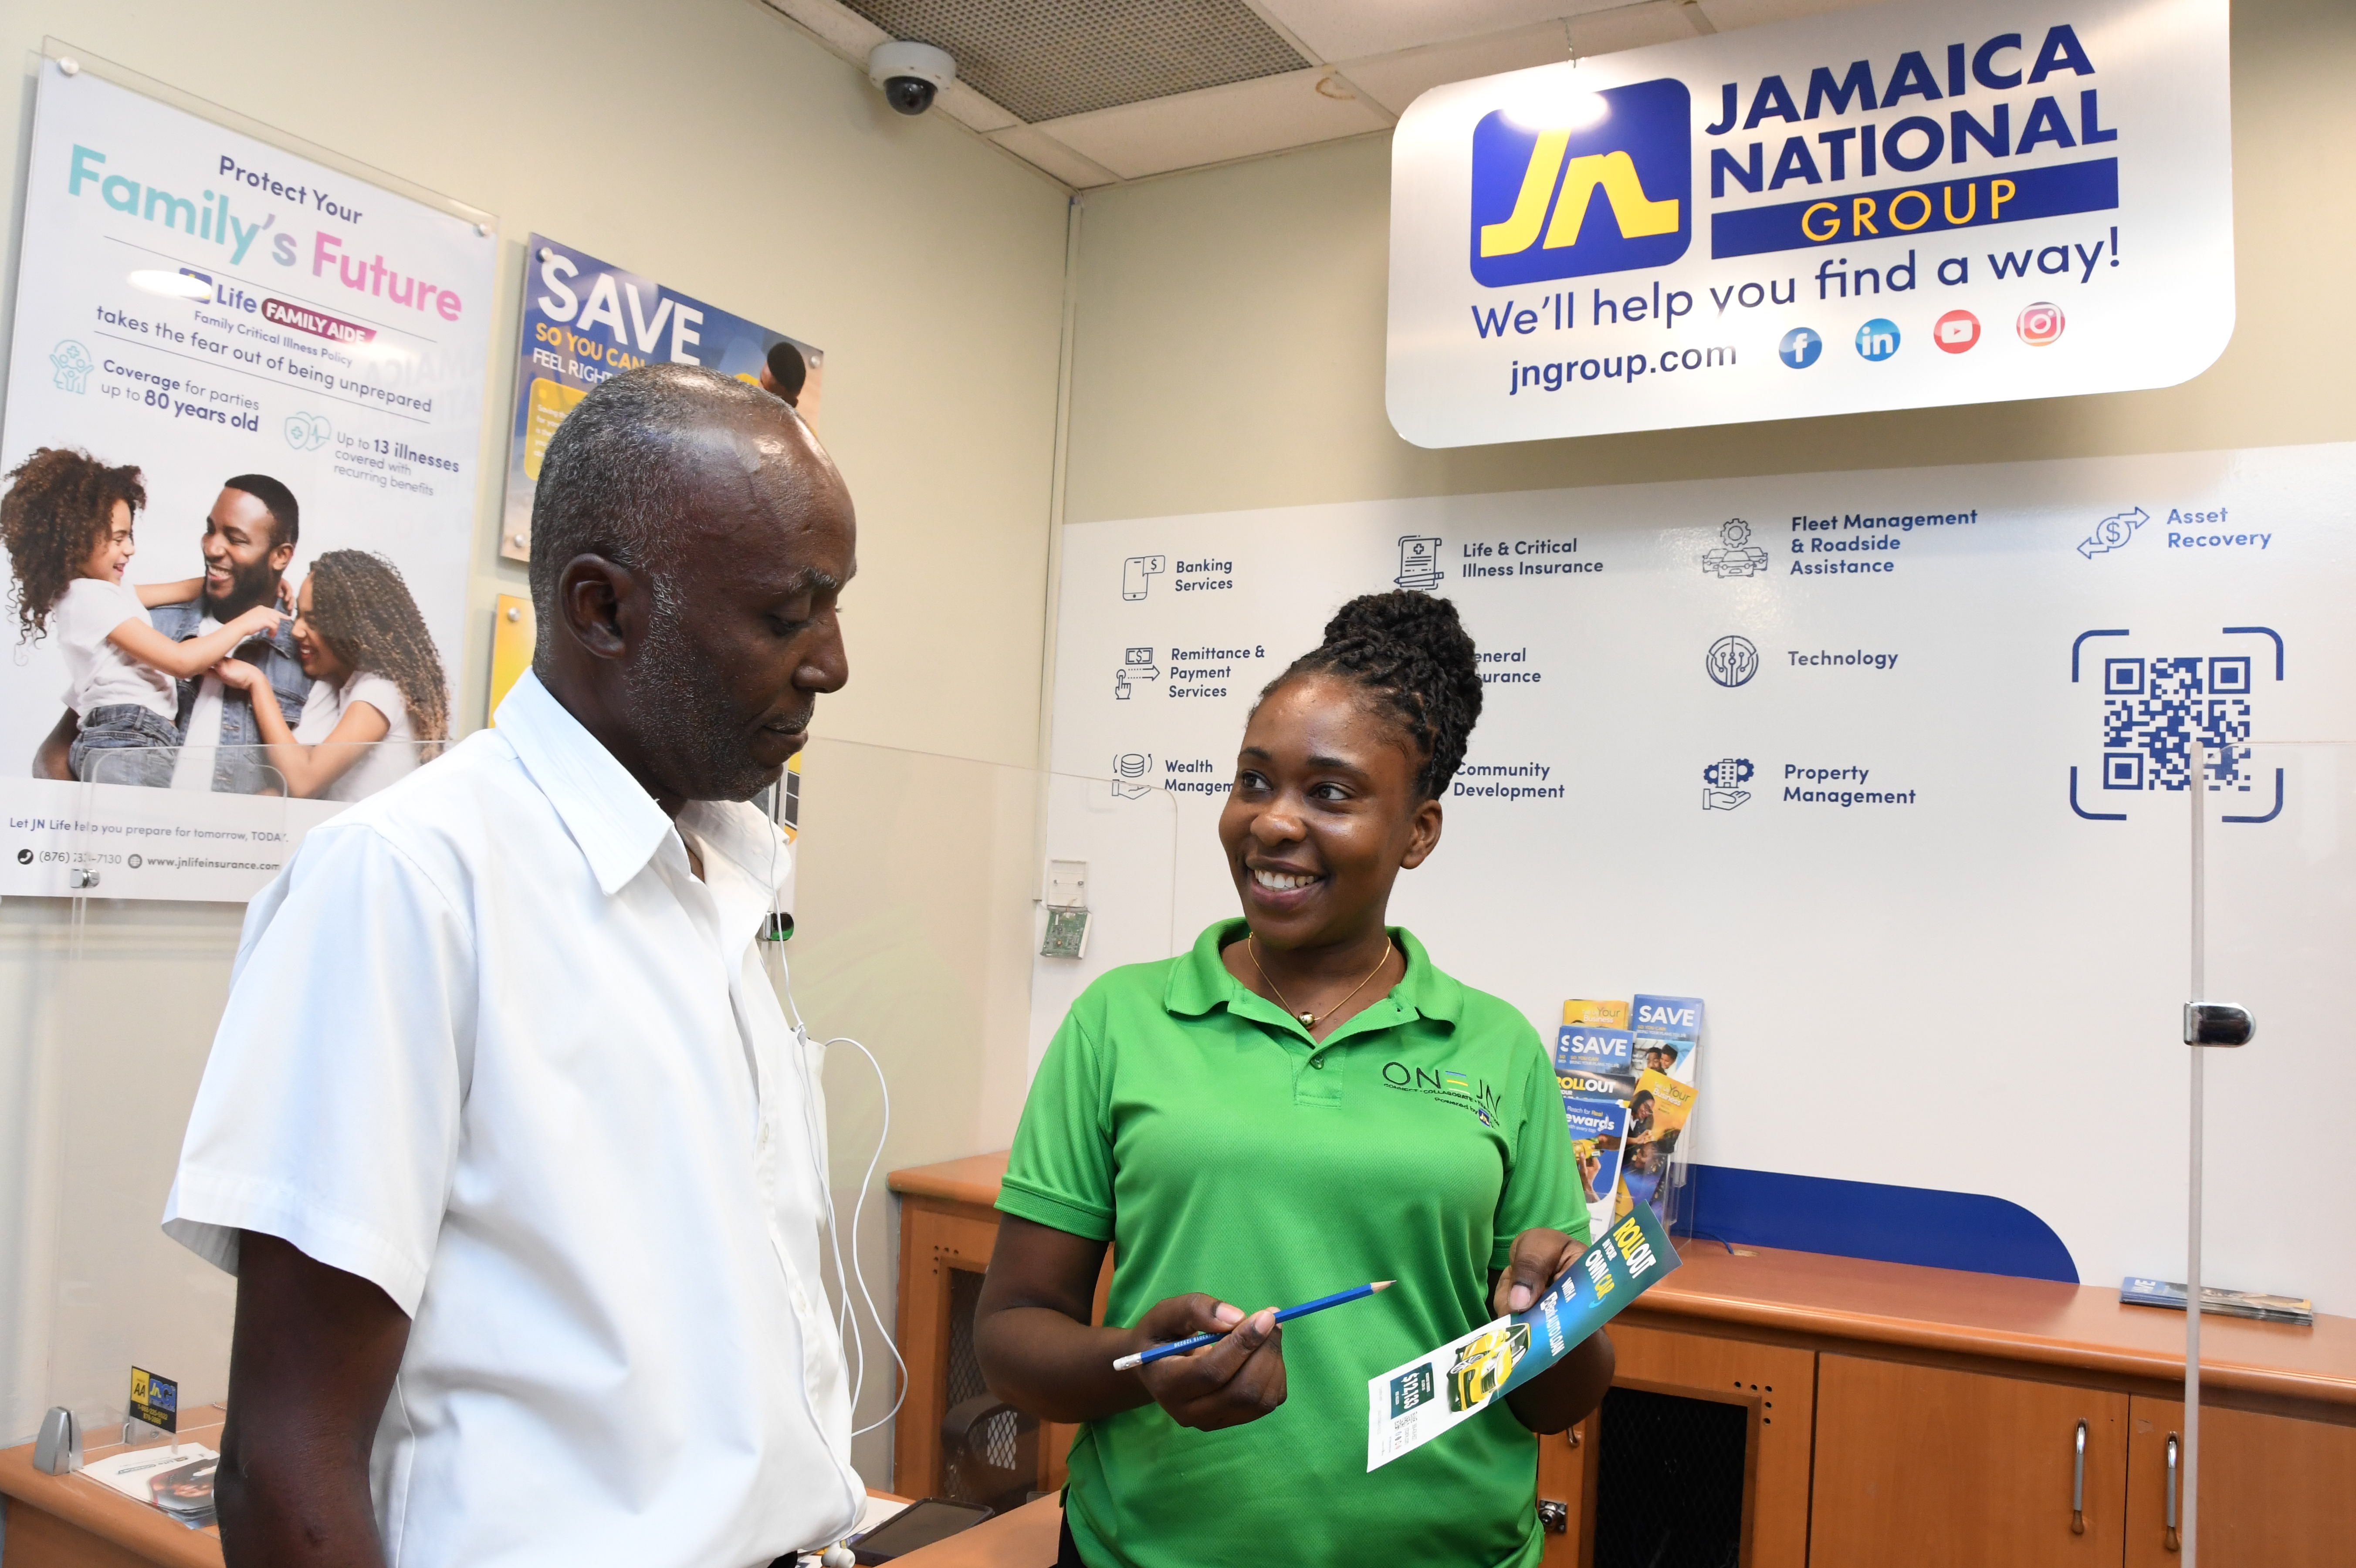 Stacy-Ann Brown McLeish (right), JN Group sales representative, provides a shopper at the MegaMart Waterloo Road branch in St Andrew, with information on a JN Bank auto loan.